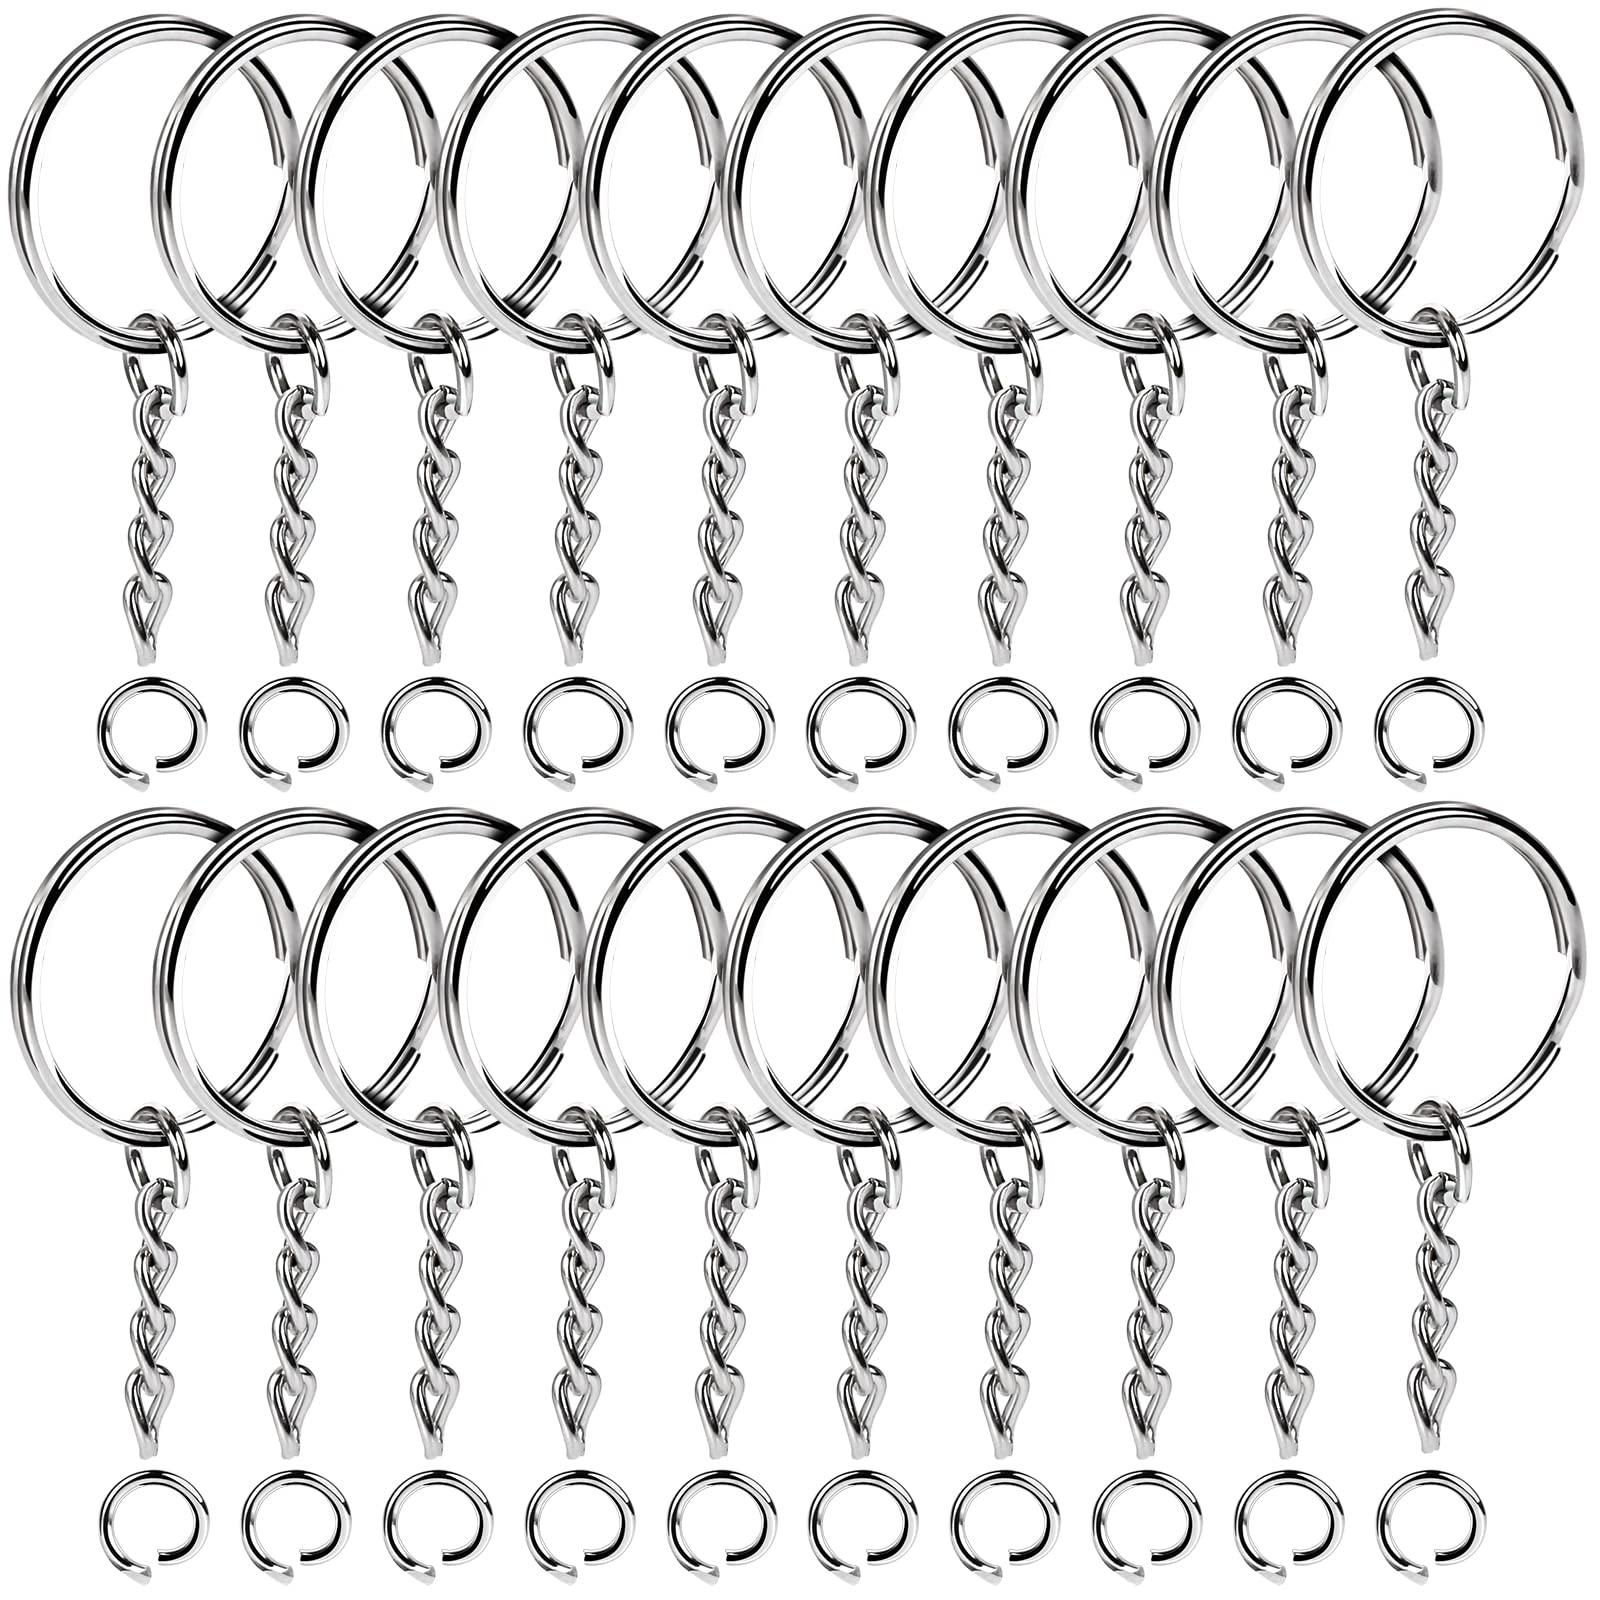 Teenitor Metal Split Key Chain Rings for Arts and Craft- 60 Key Chains 25mm  with 26mm